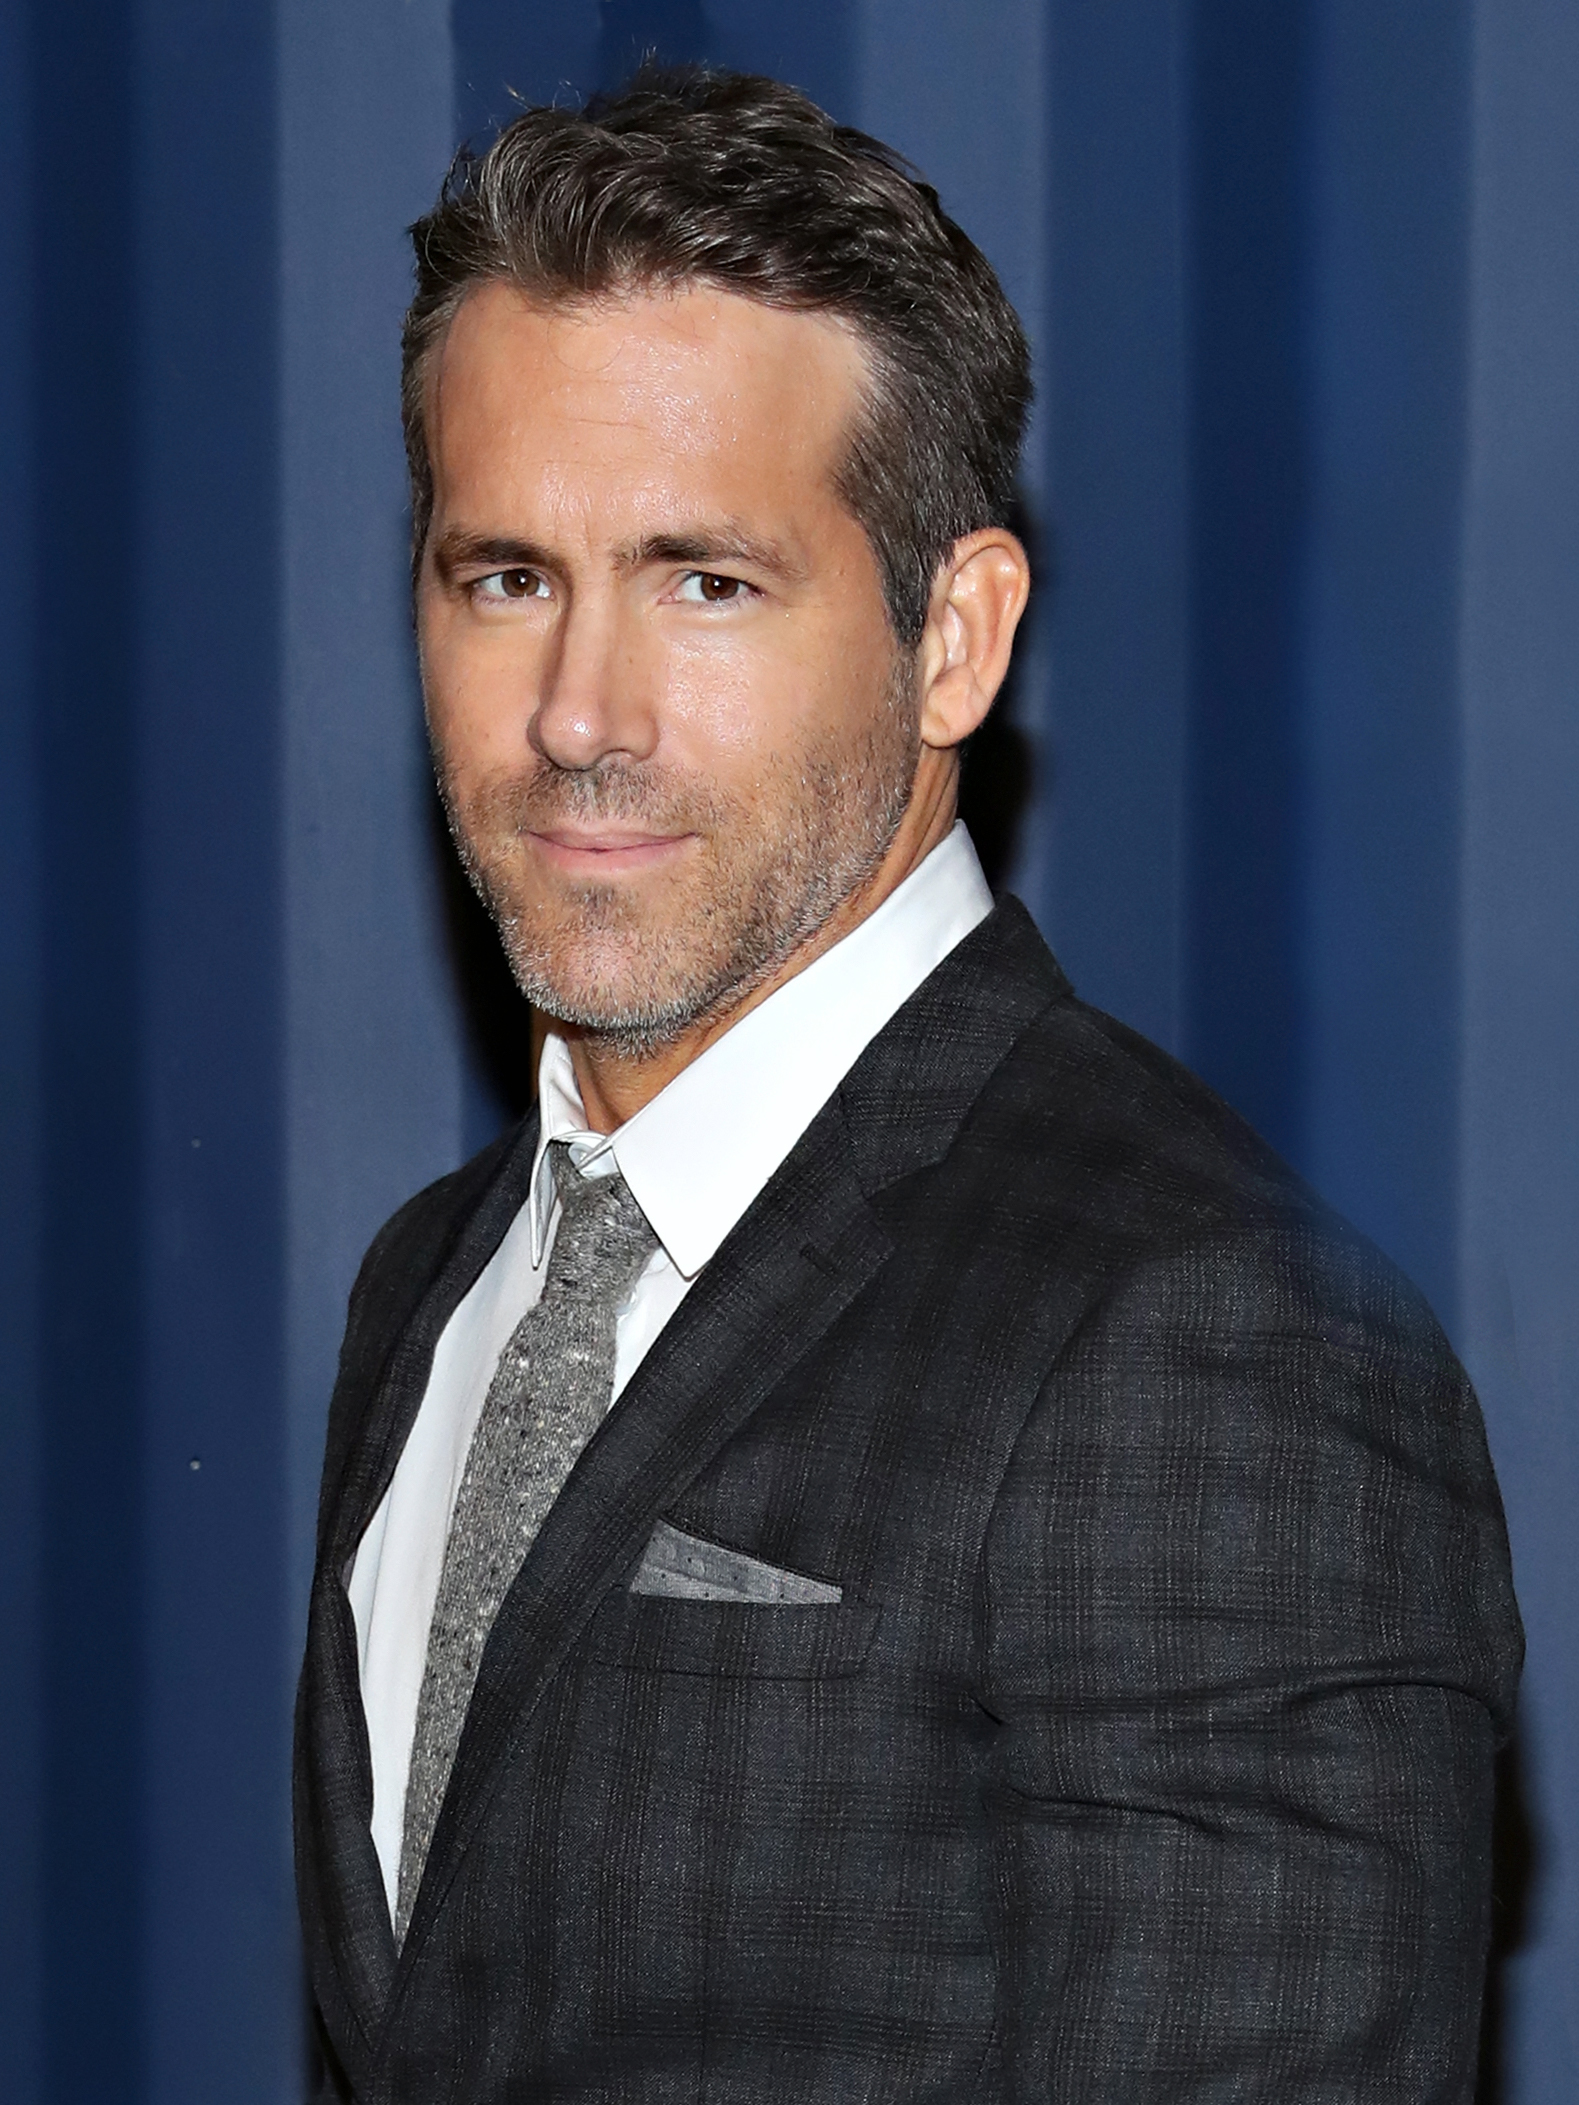 Ryan Reynolds: The charismatic actor and versatile star taking Hollywood by  storm